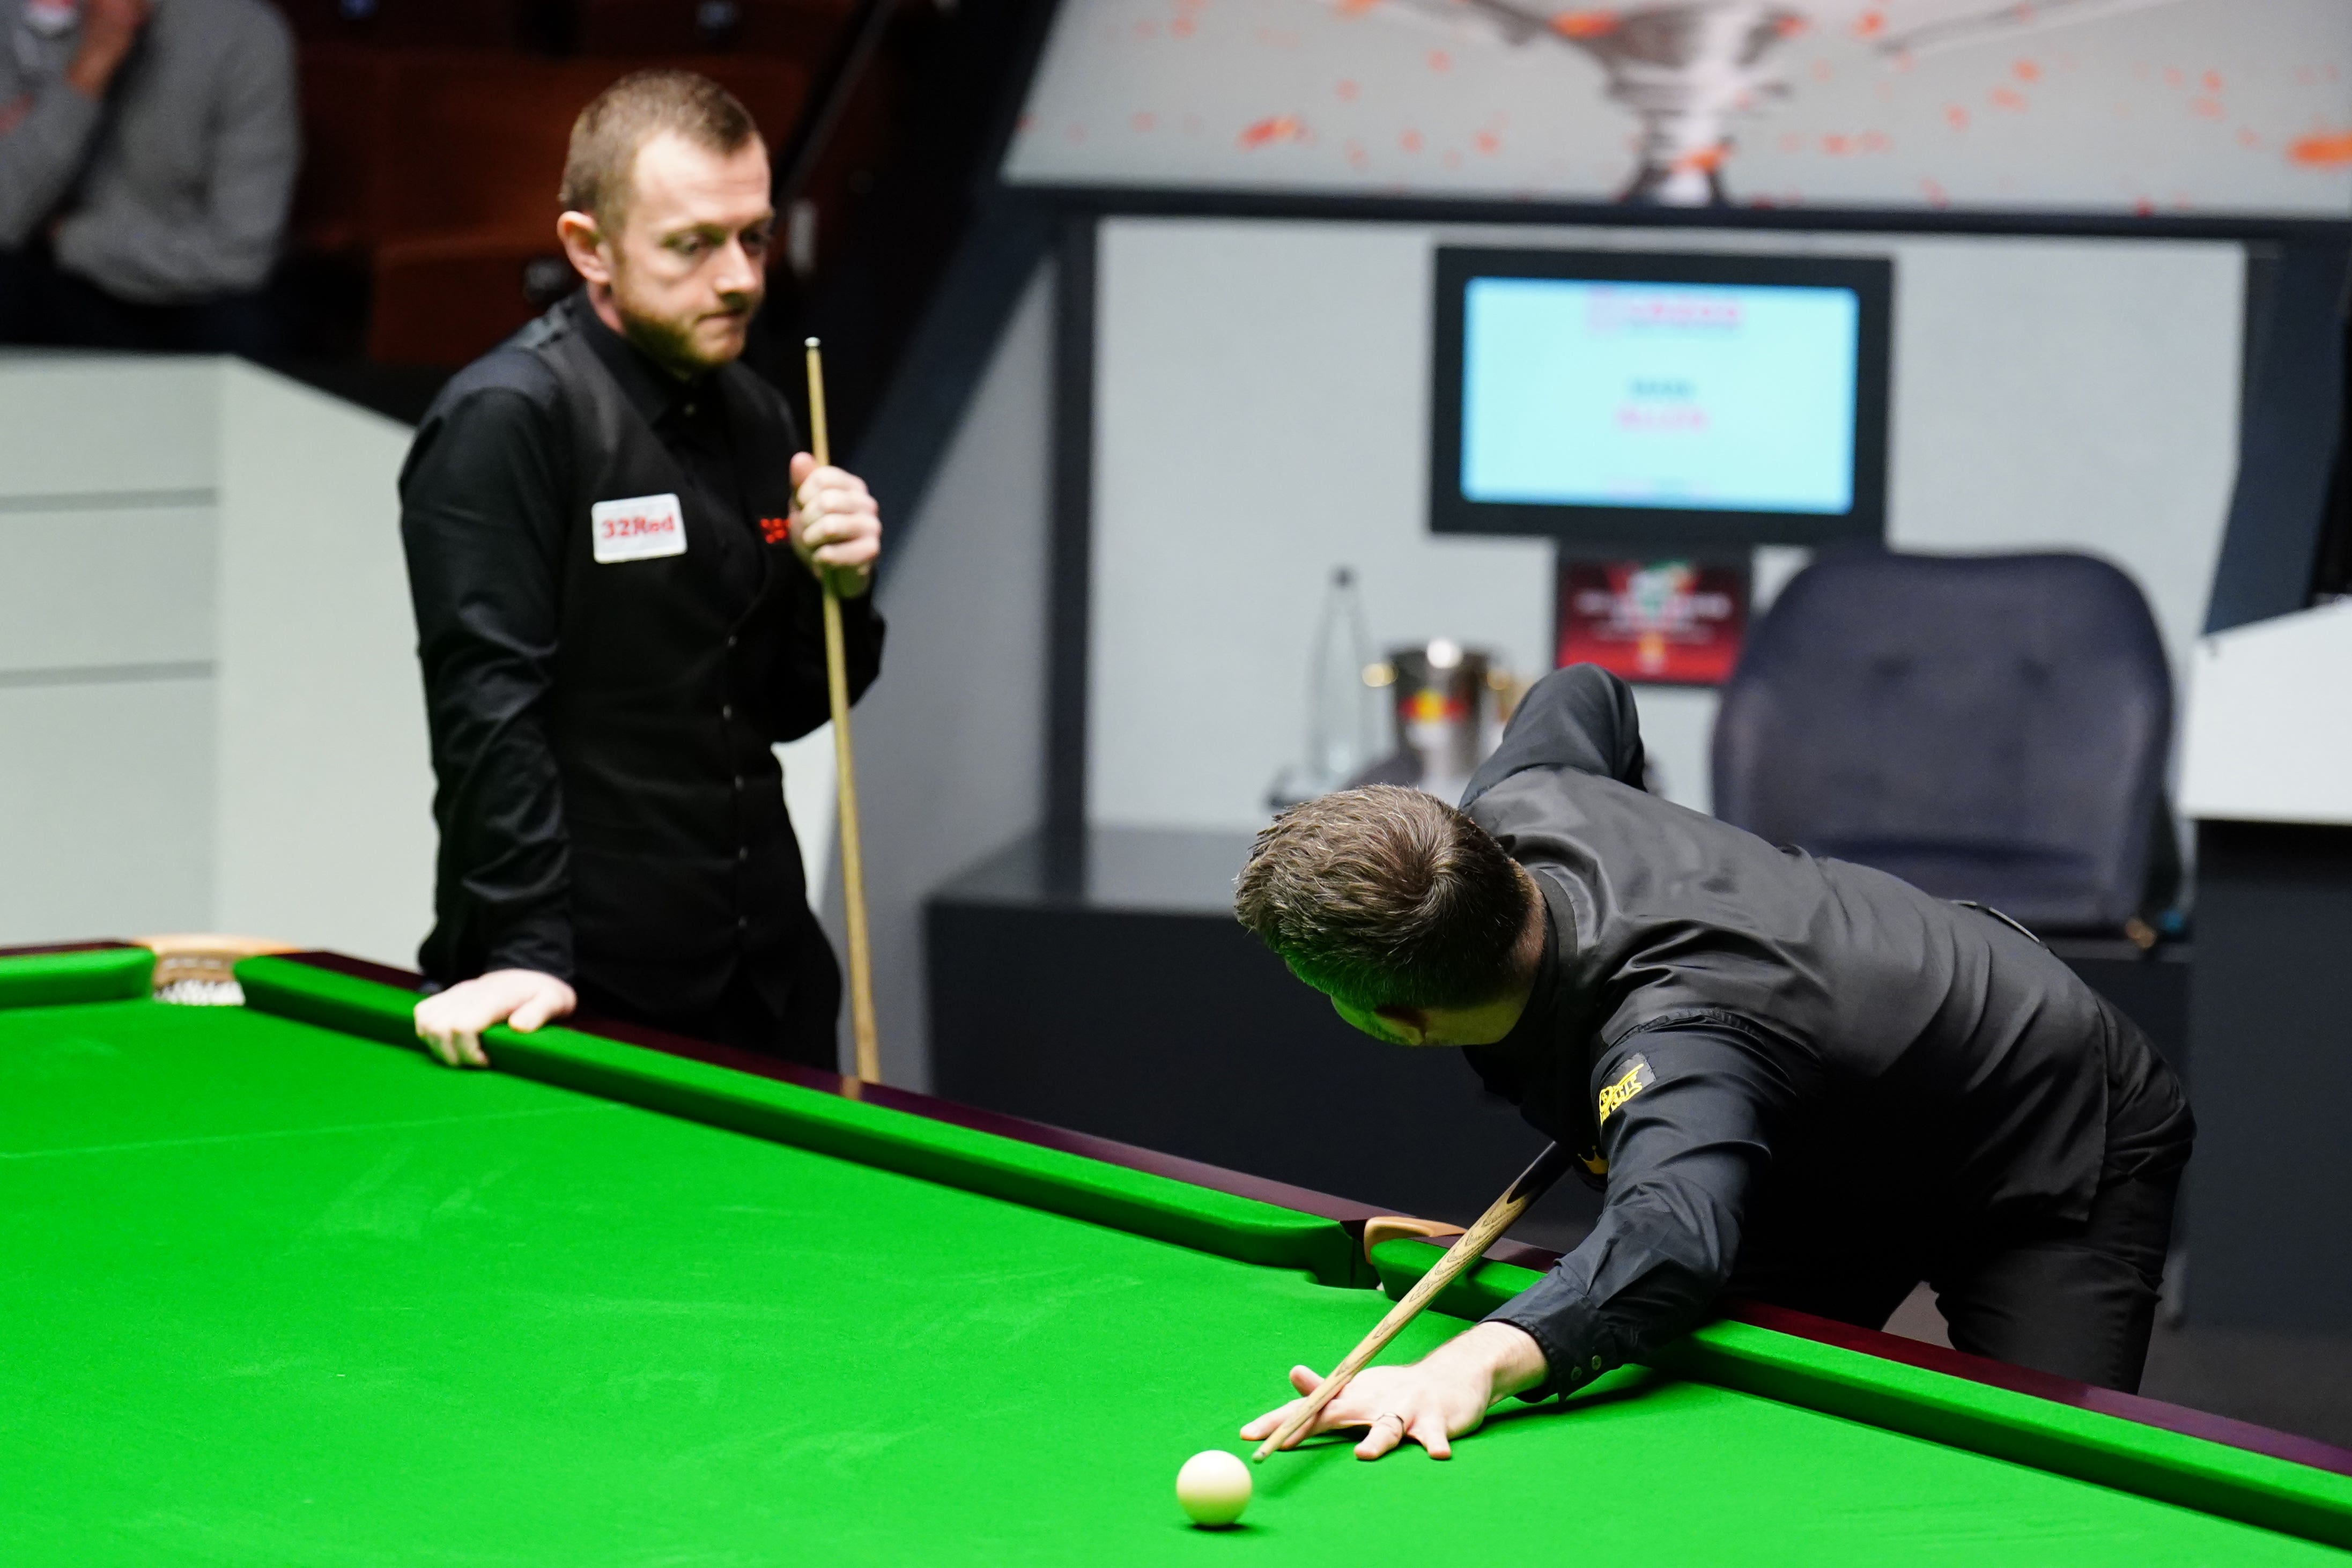 mark selby live score